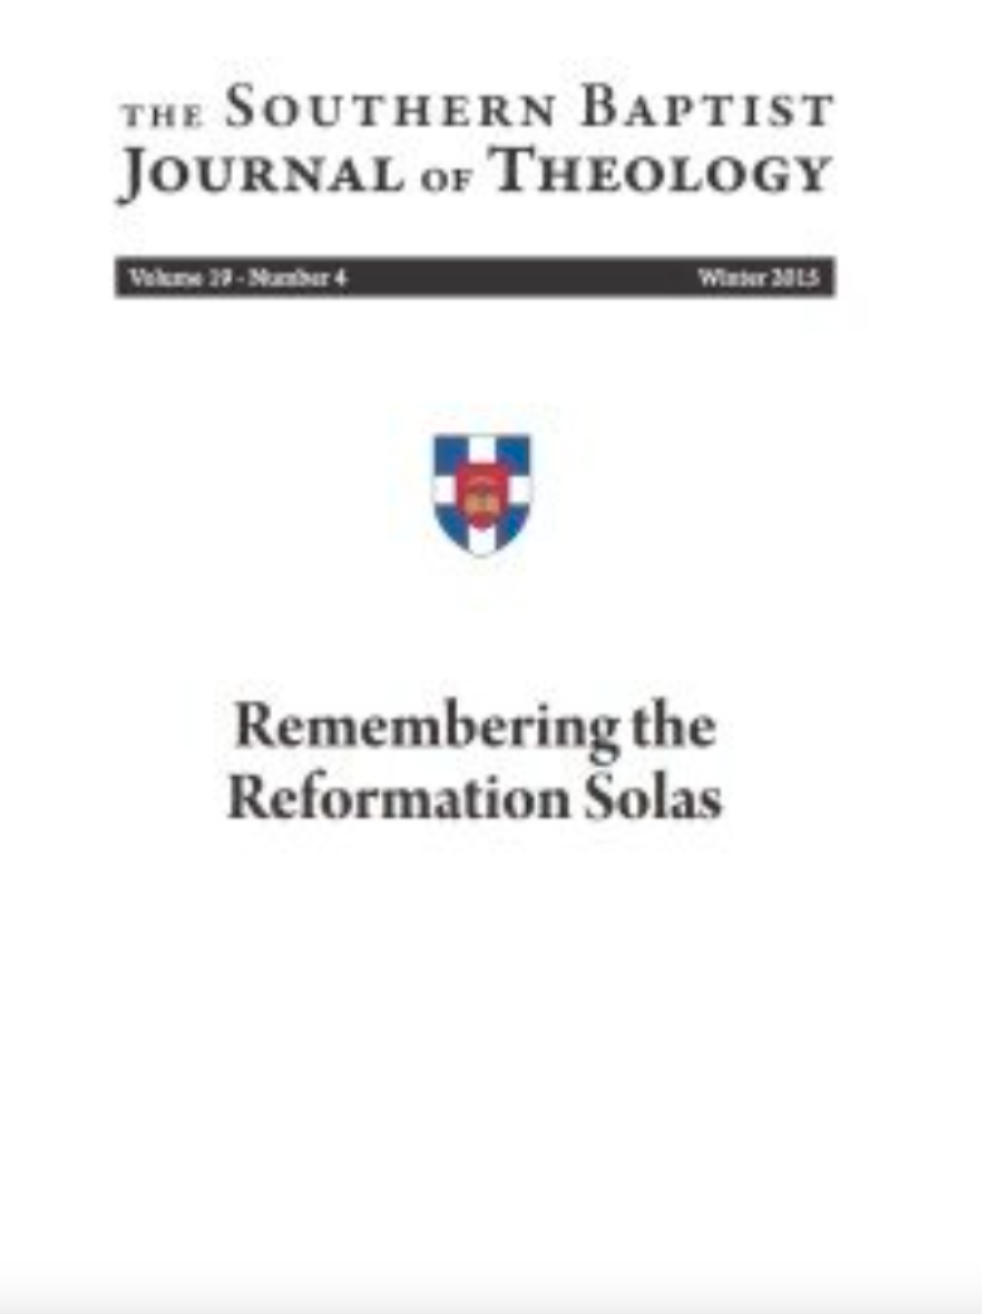 Southern Baptist Journal of Theology